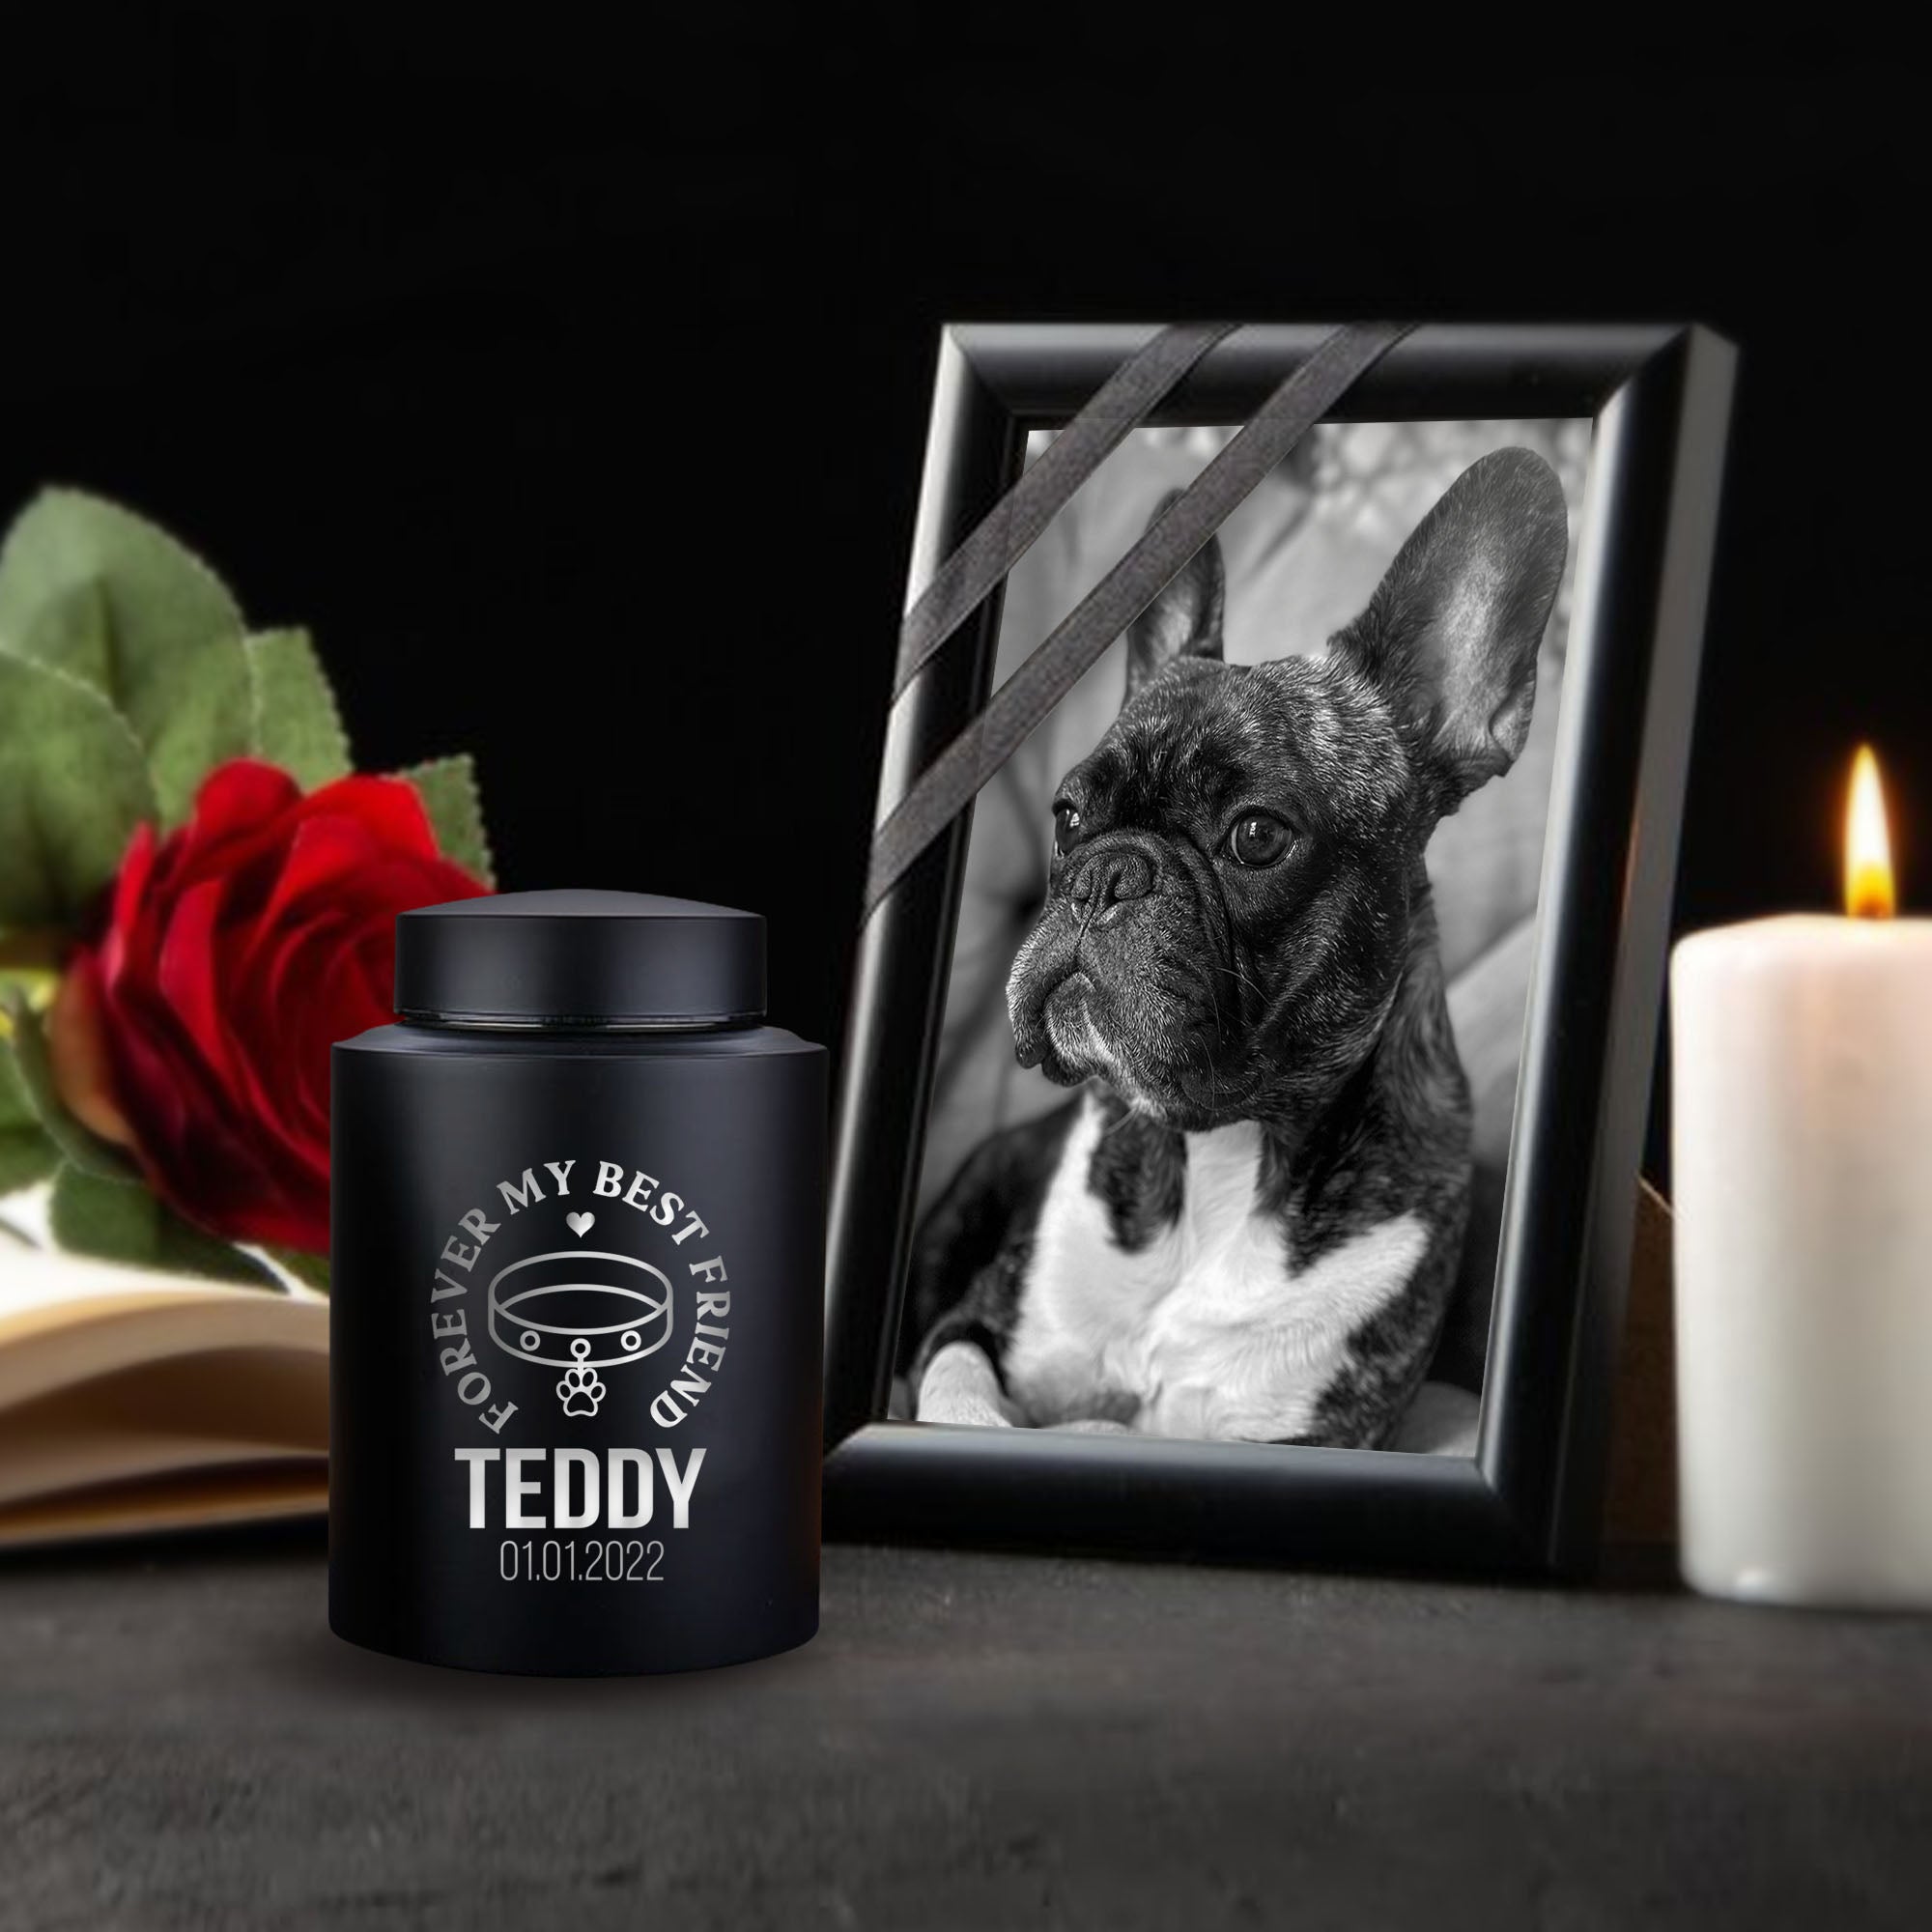 Personalized Custom Large Urn Pet Dog Cremation Urn Engraved with Name, Date and Text - Round Powder Coated Steel Urns for Dog Ashes, Pet Size 90-115 lbs